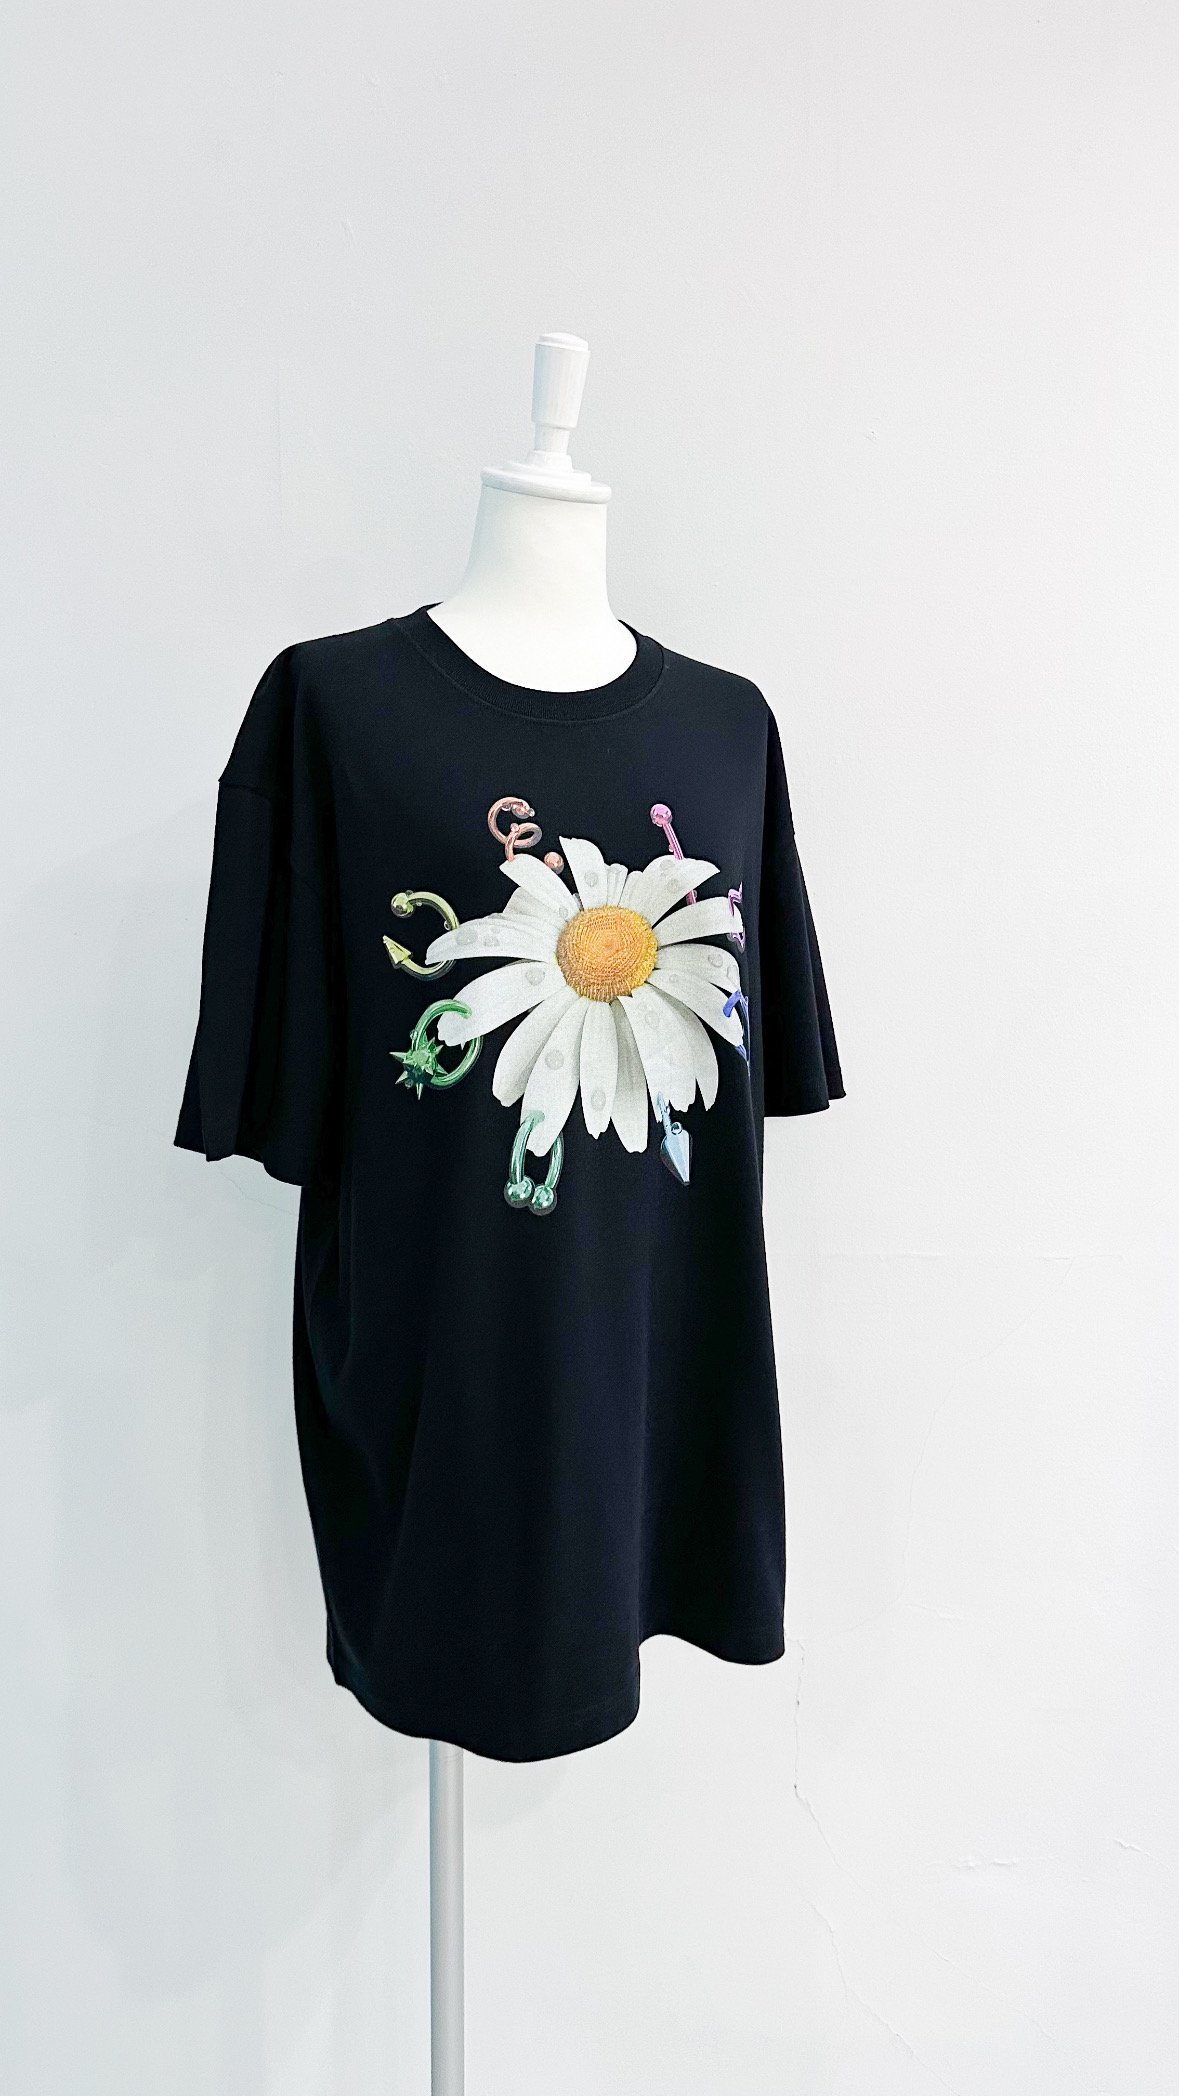 <img class='new_mark_img1' src='https://img.shop-pro.jp/img/new/icons47.gif' style='border:none;display:inline;margin:0px;padding:0px;width:auto;' />Fairy Ritual Tee